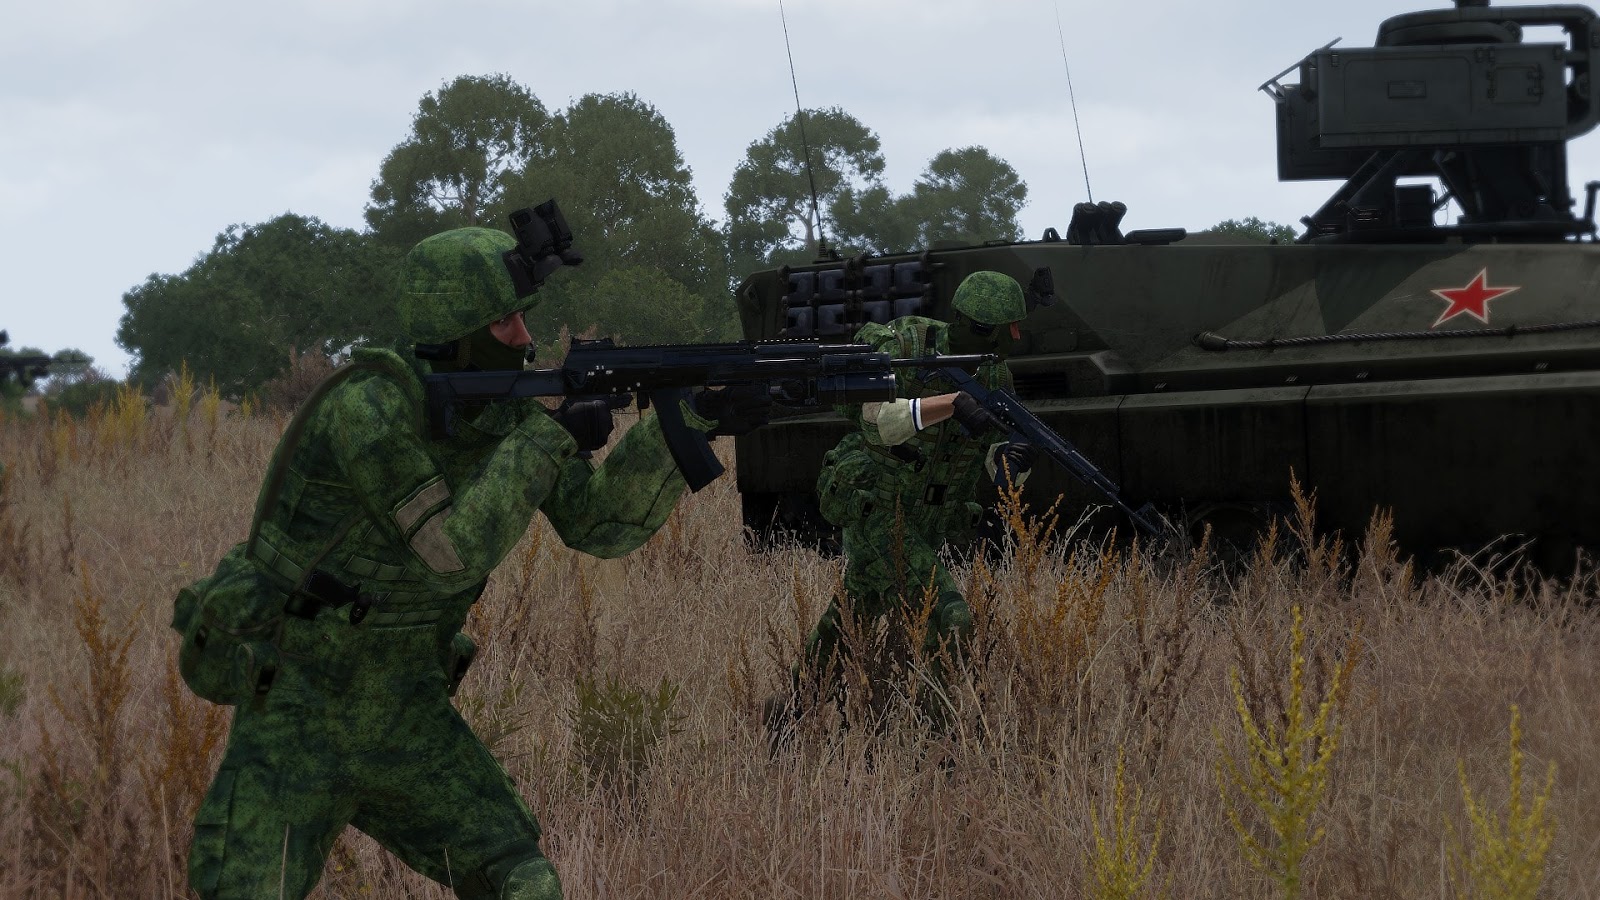 D e v 1 z. Арма 3 Russian Armed Forces 2035. Арма 3 армия России 2035. Arma 3 Russian Army. Arma 2 Russian Armed Forces Art солдат РФ.